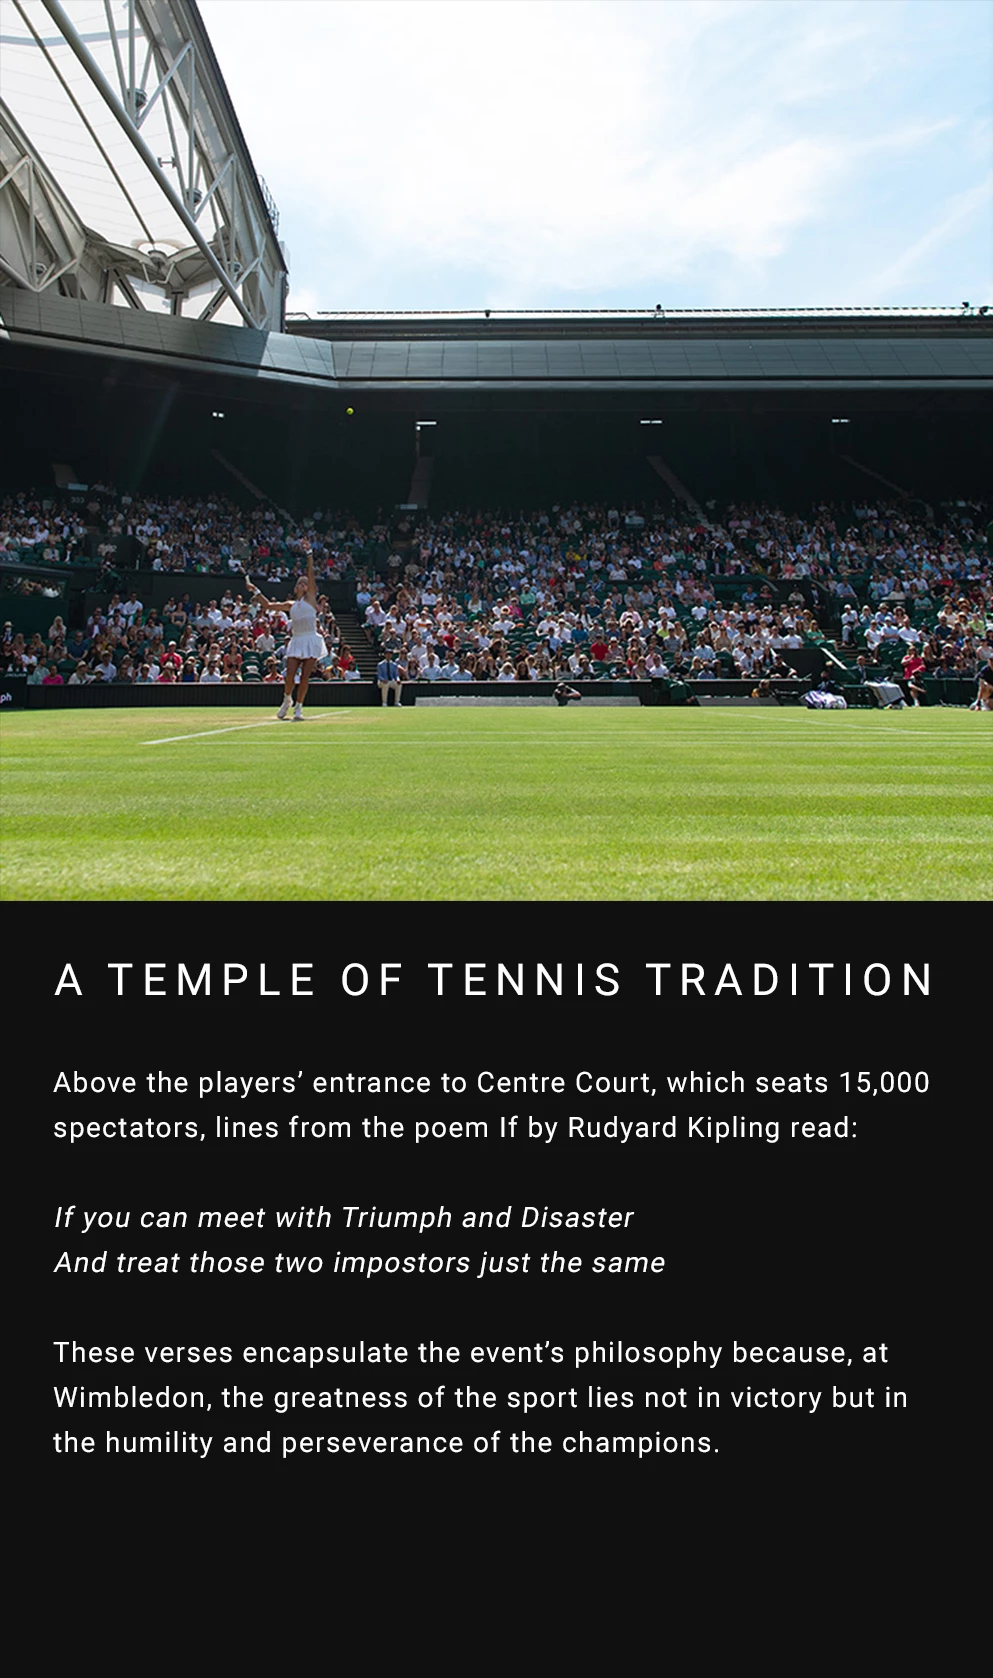 Above the players’ entrance to Centre Court, which seats 15,000 spectators, lines from the poem If by Rudyard Kipling read: If you can meet with Triumph and Disaster And treat those two impostors just the same